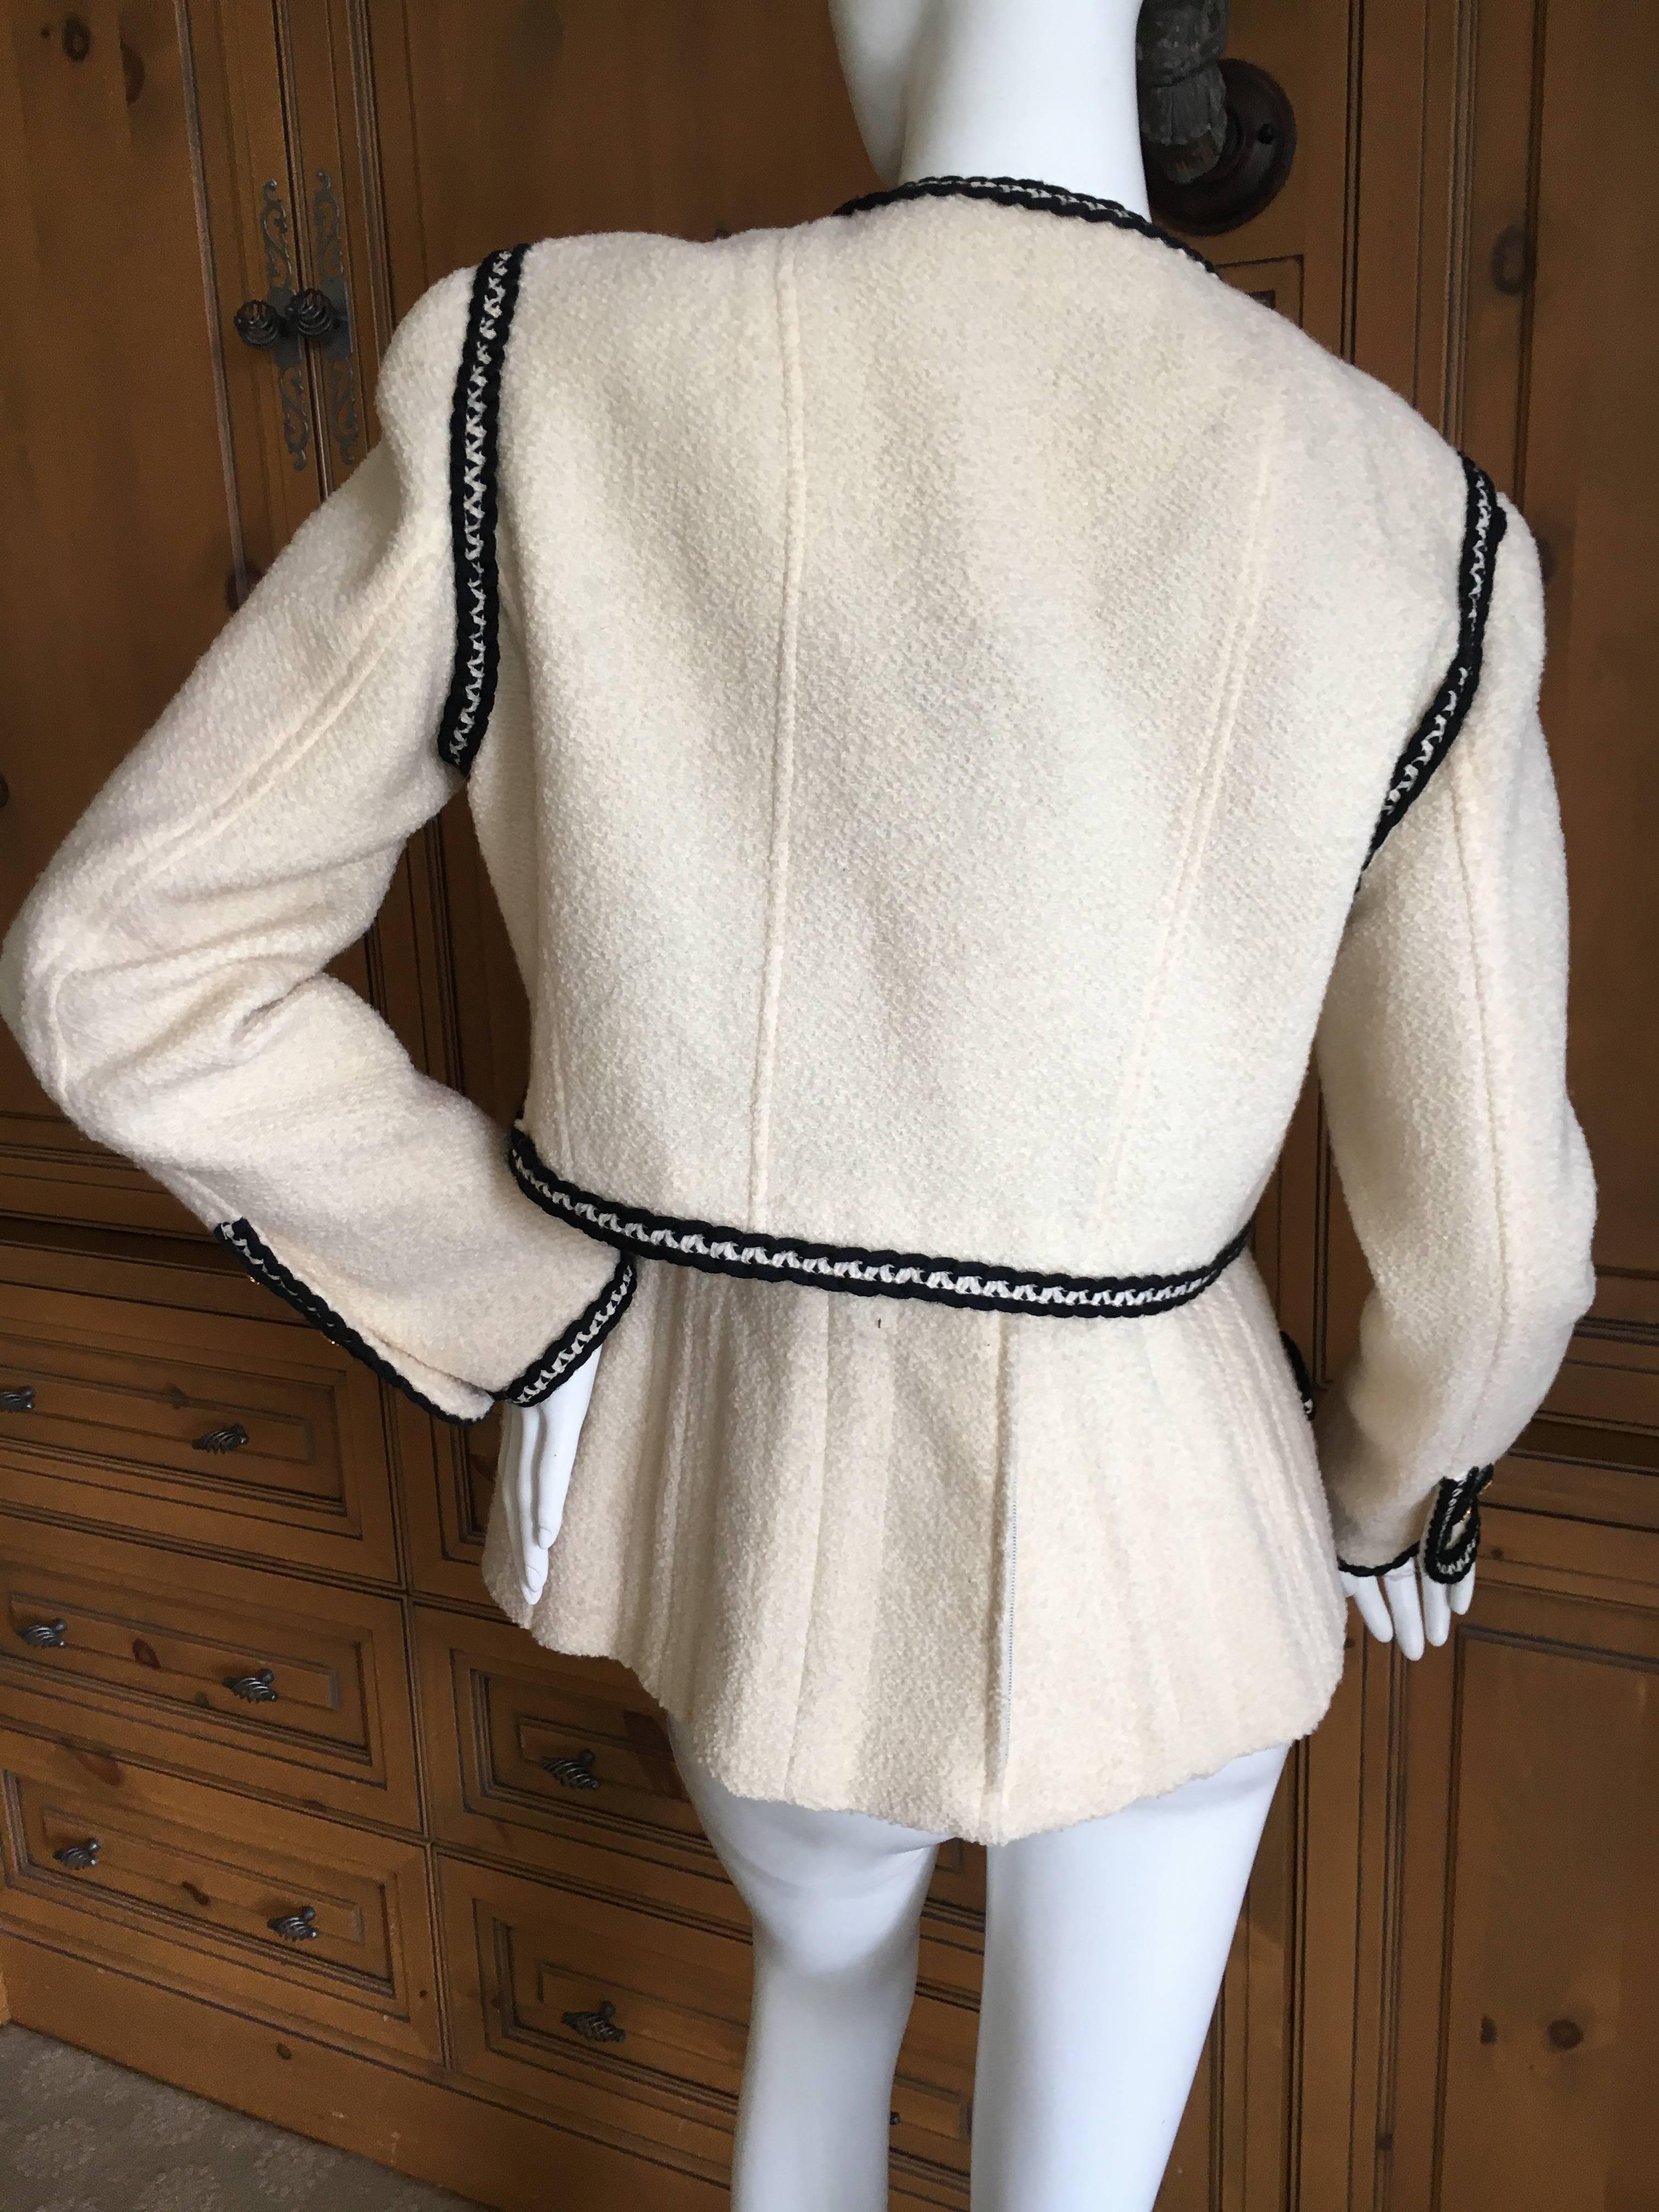 Chanel Vintage Ivory Cropped Jacket with Contrasting Trim and Nine CC Buttons
Printemps 1993.
Size 42
Bust 42